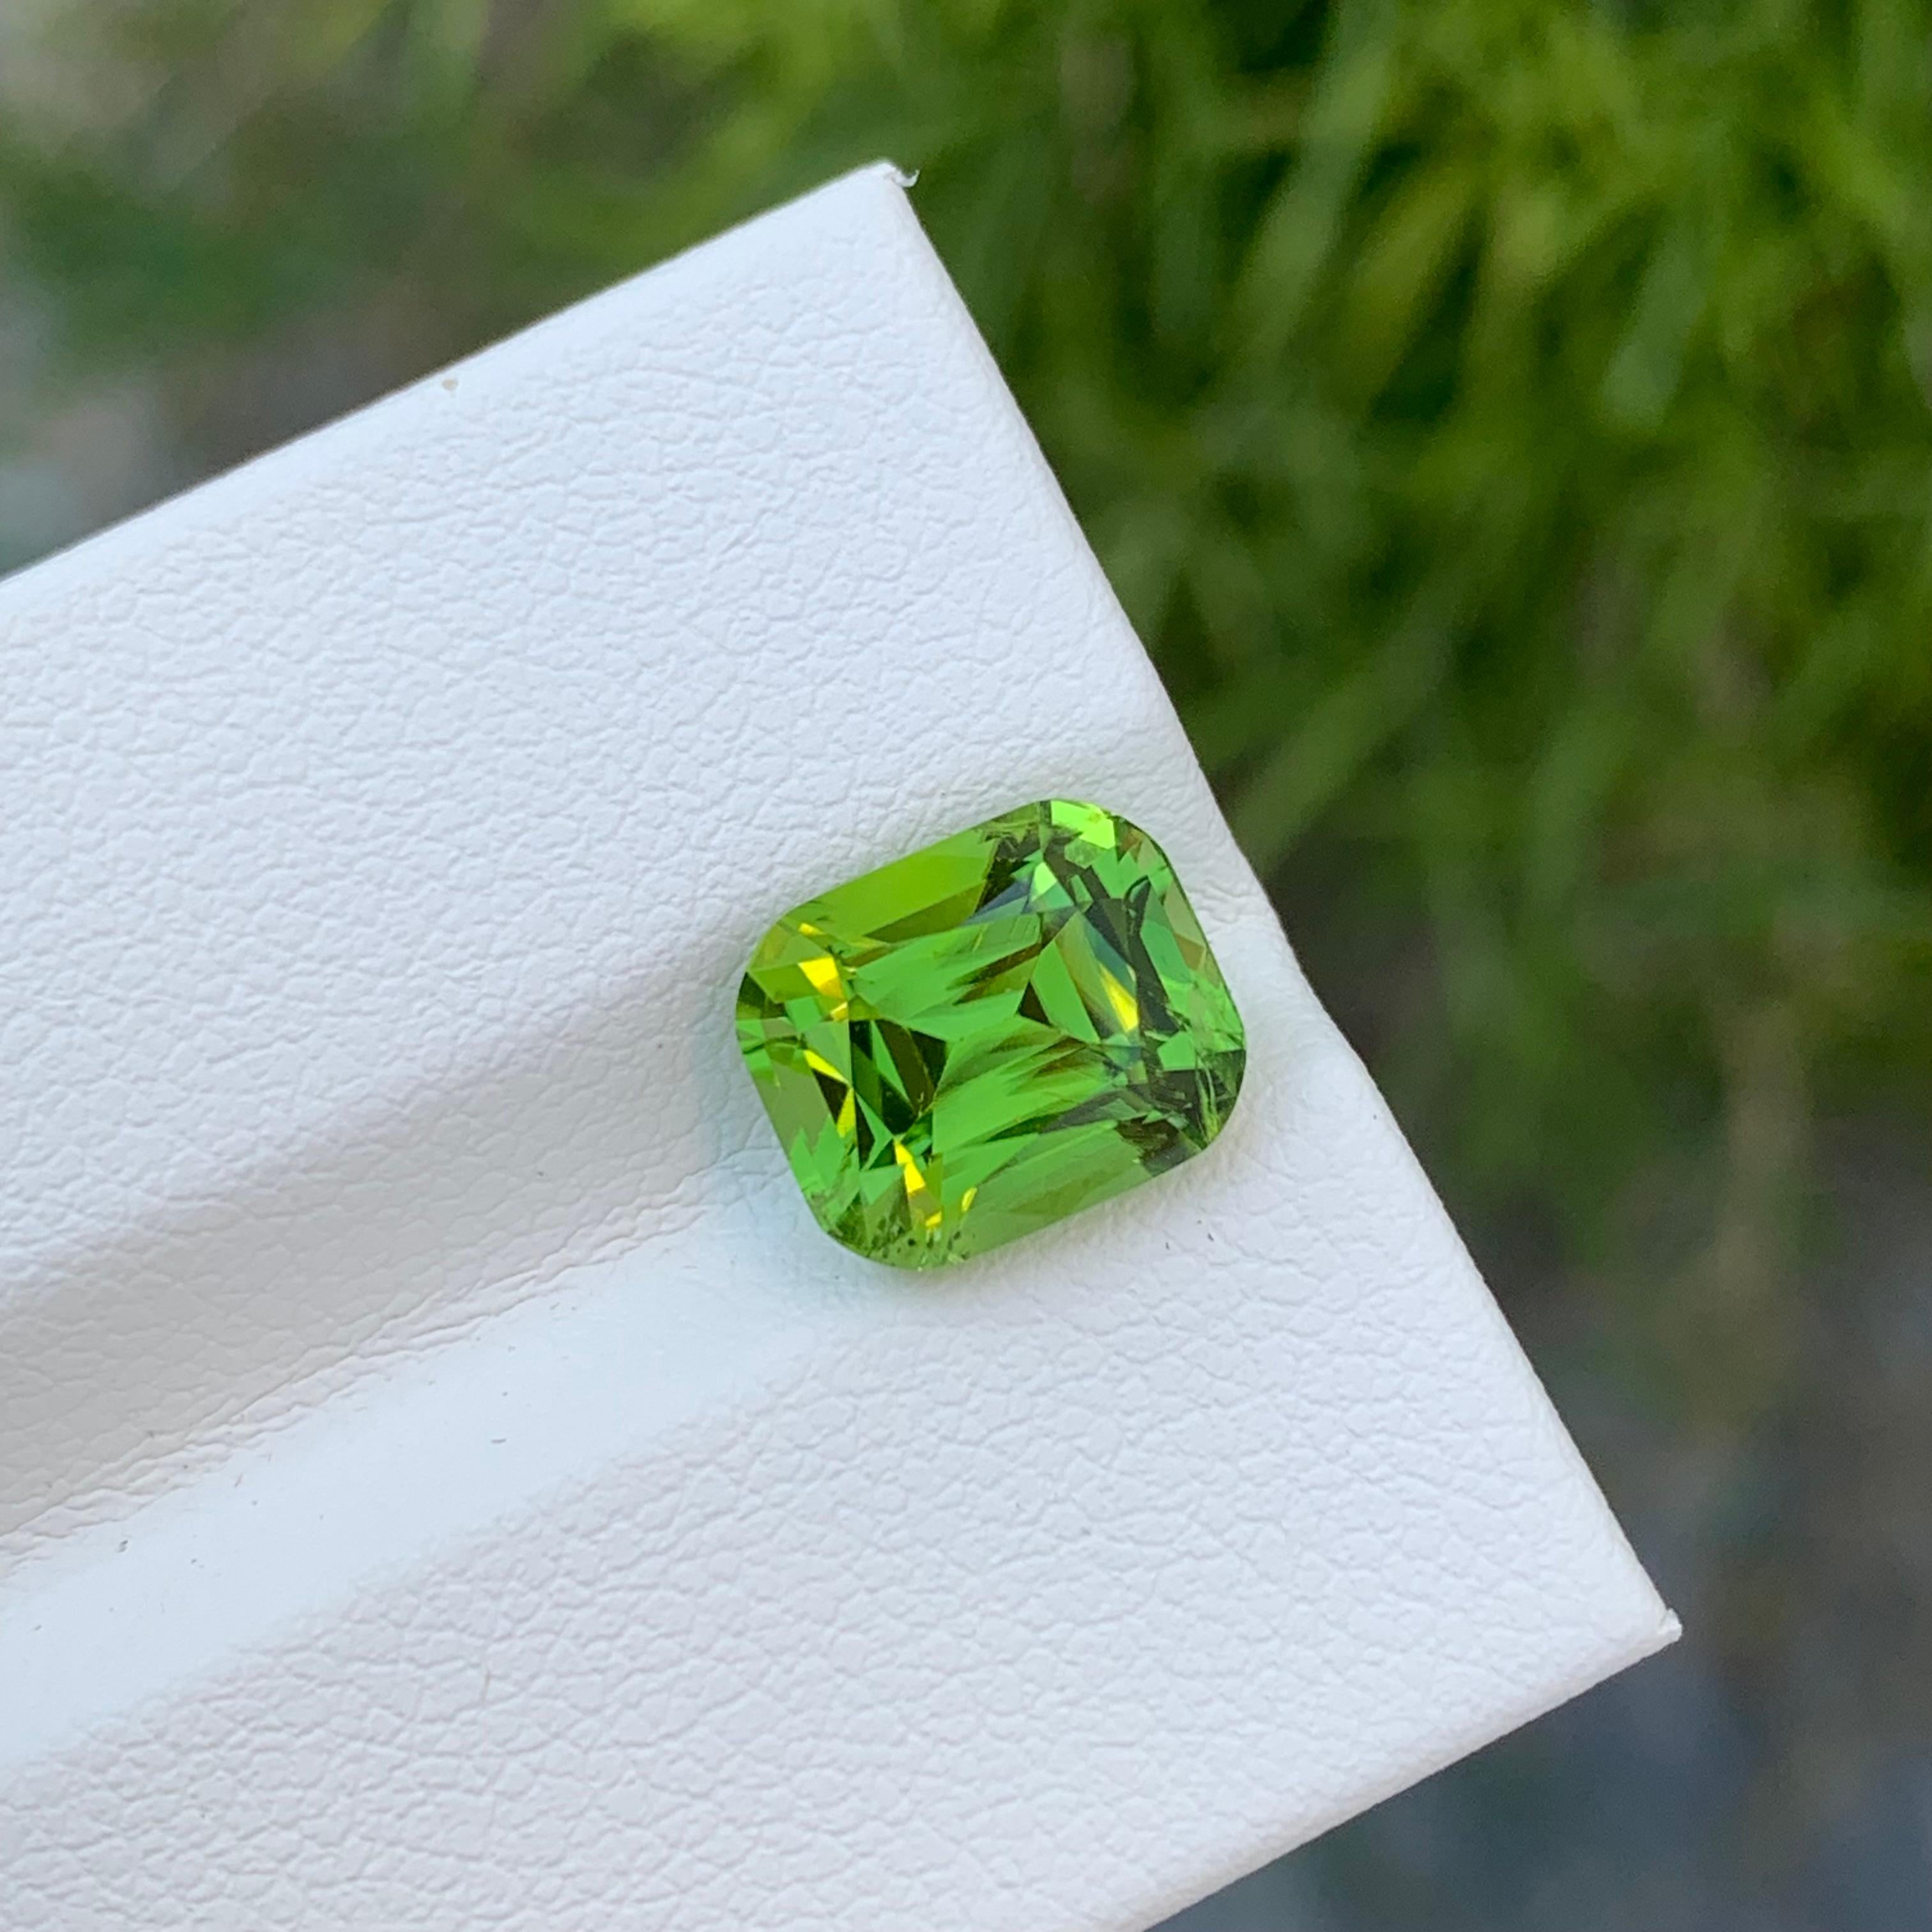 Loose Peridot
Weight: 3.85 Carats
Dimension: 9.2 x 7.8 x 6.3 Mm
Colour: Green
Origin: Supat Valley, Pakistan
Shape: Cushion
Certificate: On Demand
Treatment: Non

Peridot, a vibrant and lustrous gemstone, has been cherished for centuries for its